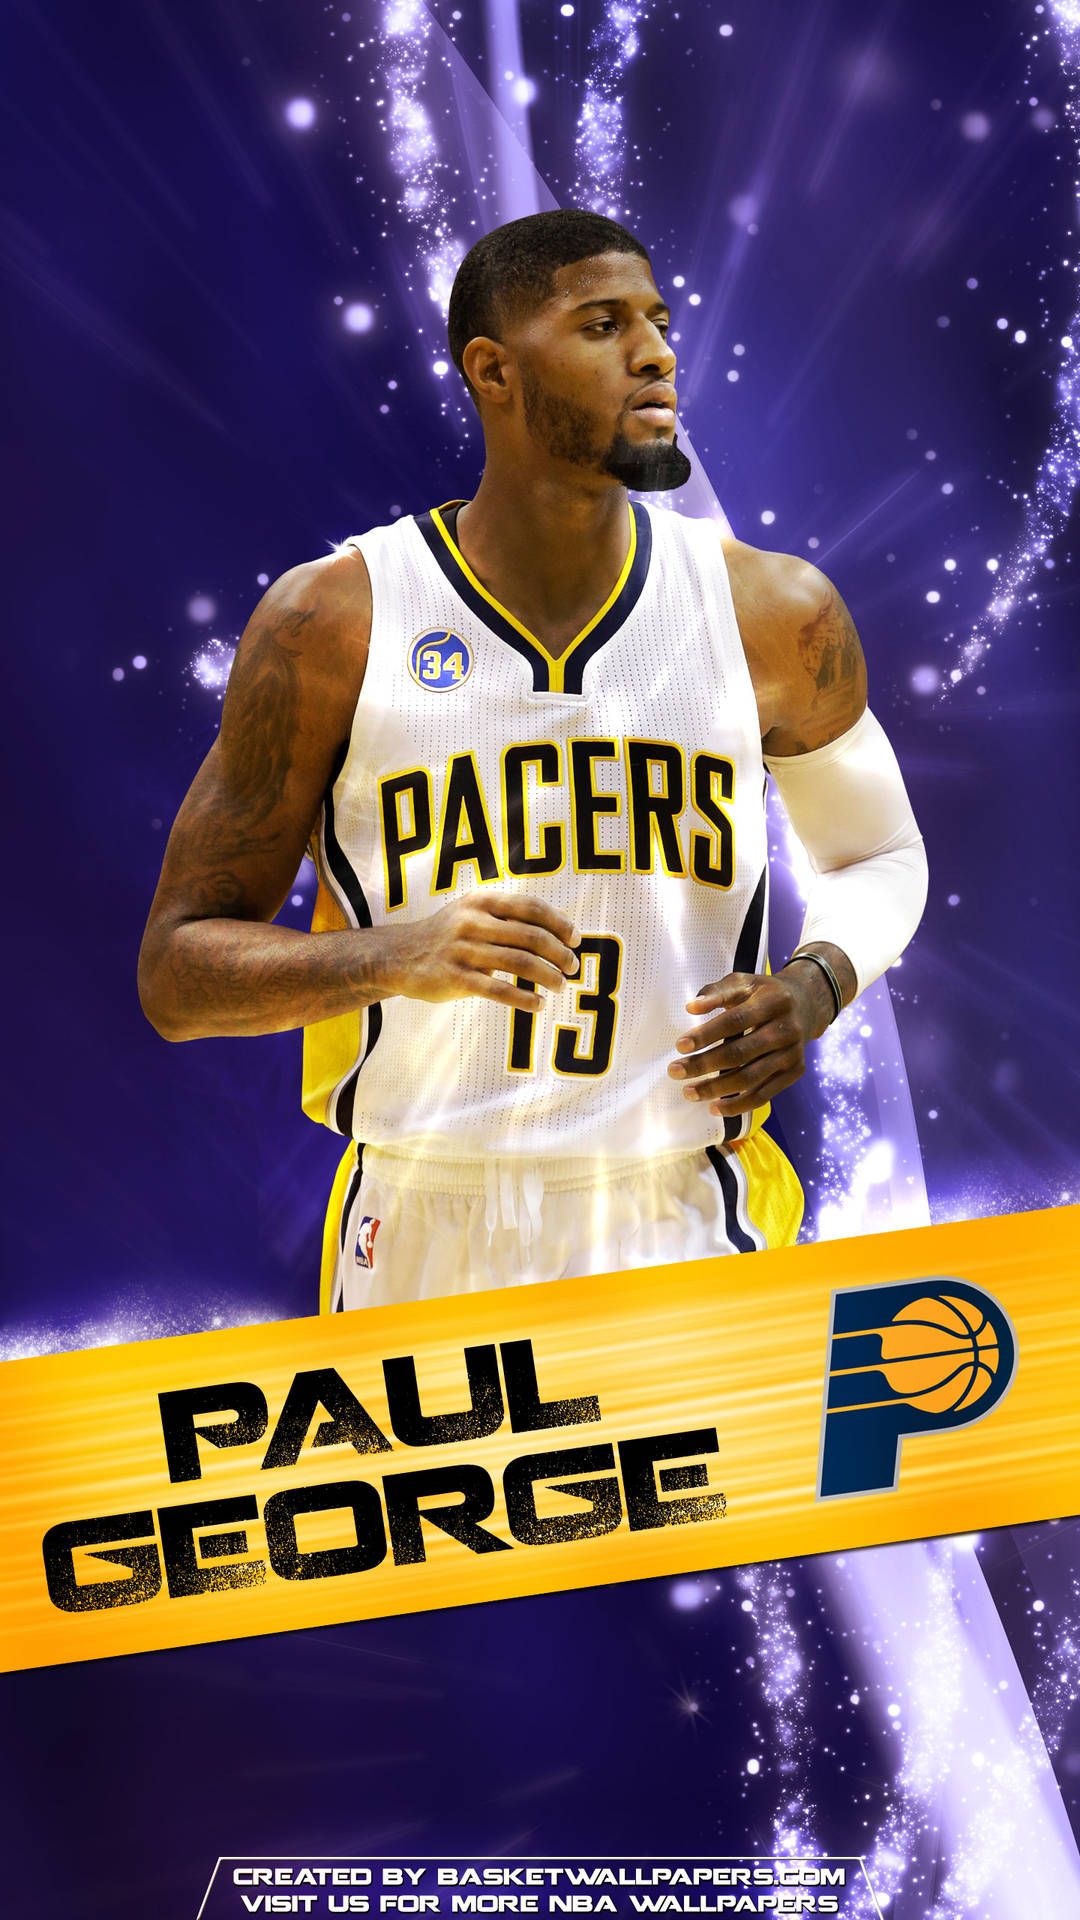 Paul George White Pacers Wallpaper